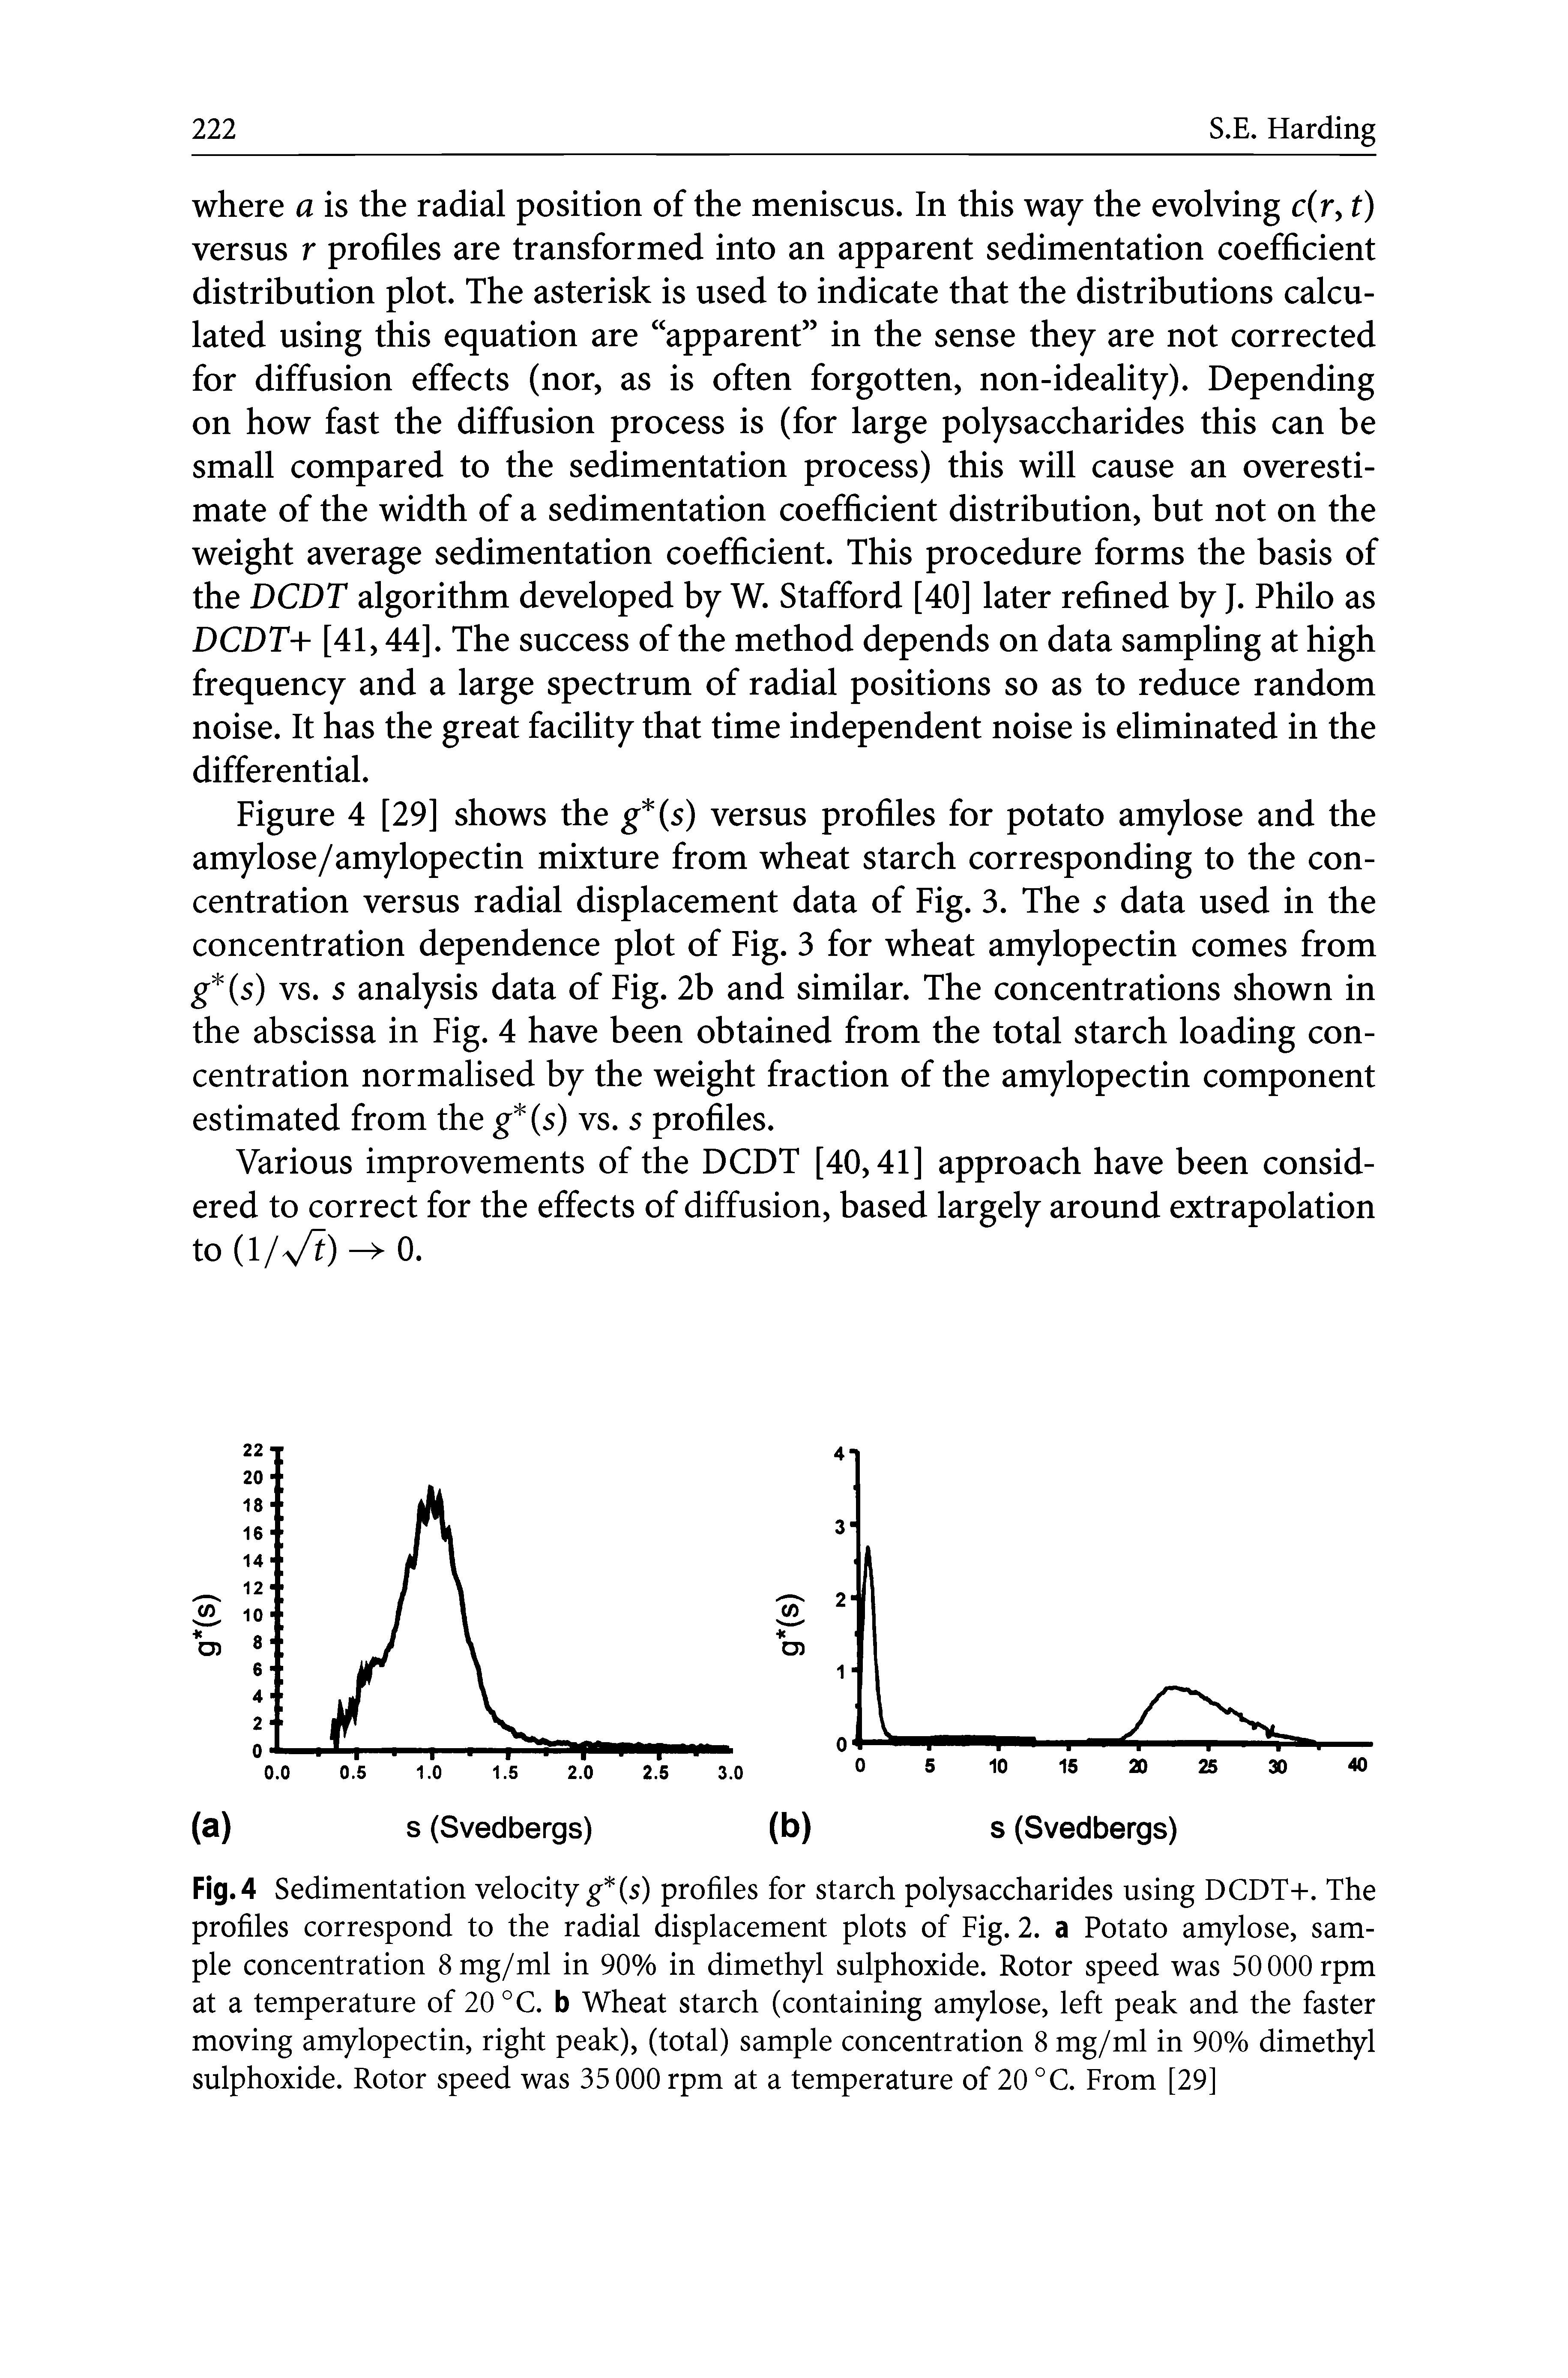 Fig. 4 Sedimentation velocity g (s) profiles for starch polysaccharides using DCDT+. The profiles correspond to the radial displacement plots of Fig. 2. a Potato amylose, sample concentration 8 mg/ml in 90% in dimethyl sulphoxide. Rotor speed was 50 000 rpm at a temperature of 20 °C. b Wheat starch (containing amylose, left peak and the faster moving amylopectin, right peak), (total) sample concentration 8 mg/ml in 90% dimethyl sulphoxide. Rotor speed was 35 000 rpm at a temperature of 20 °C. From [29]...